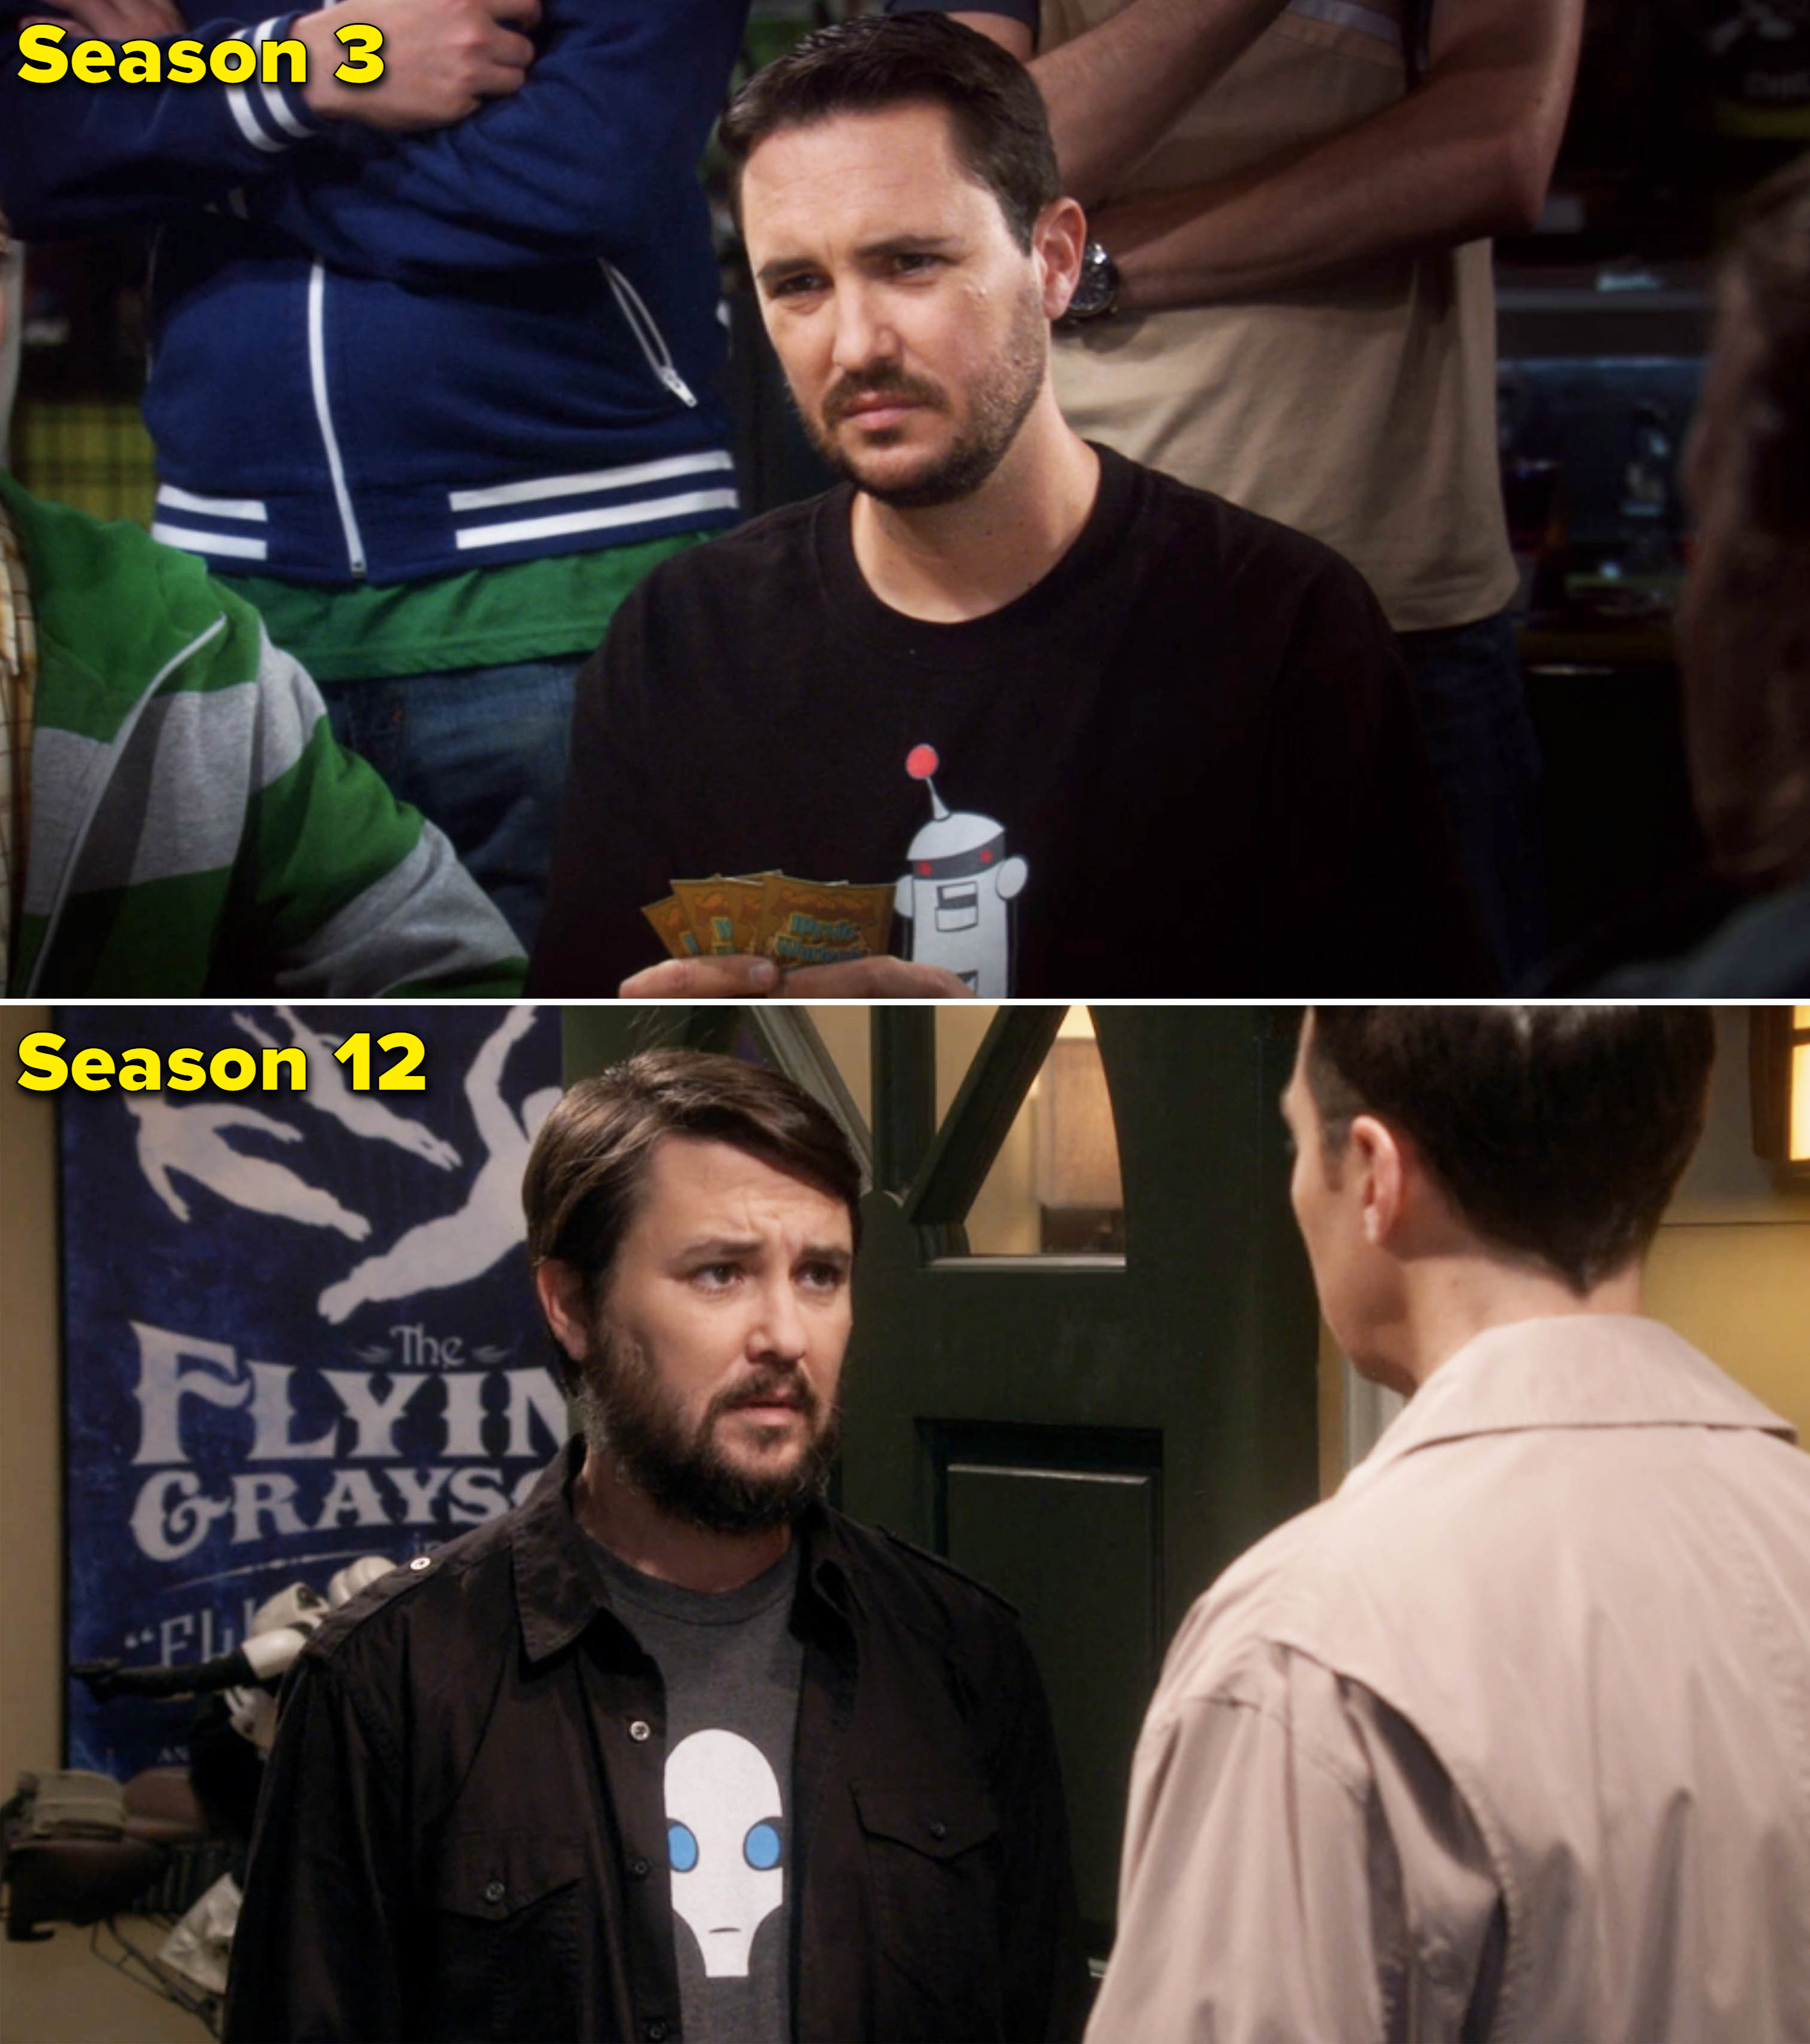 Wil in seasons 3 and 12